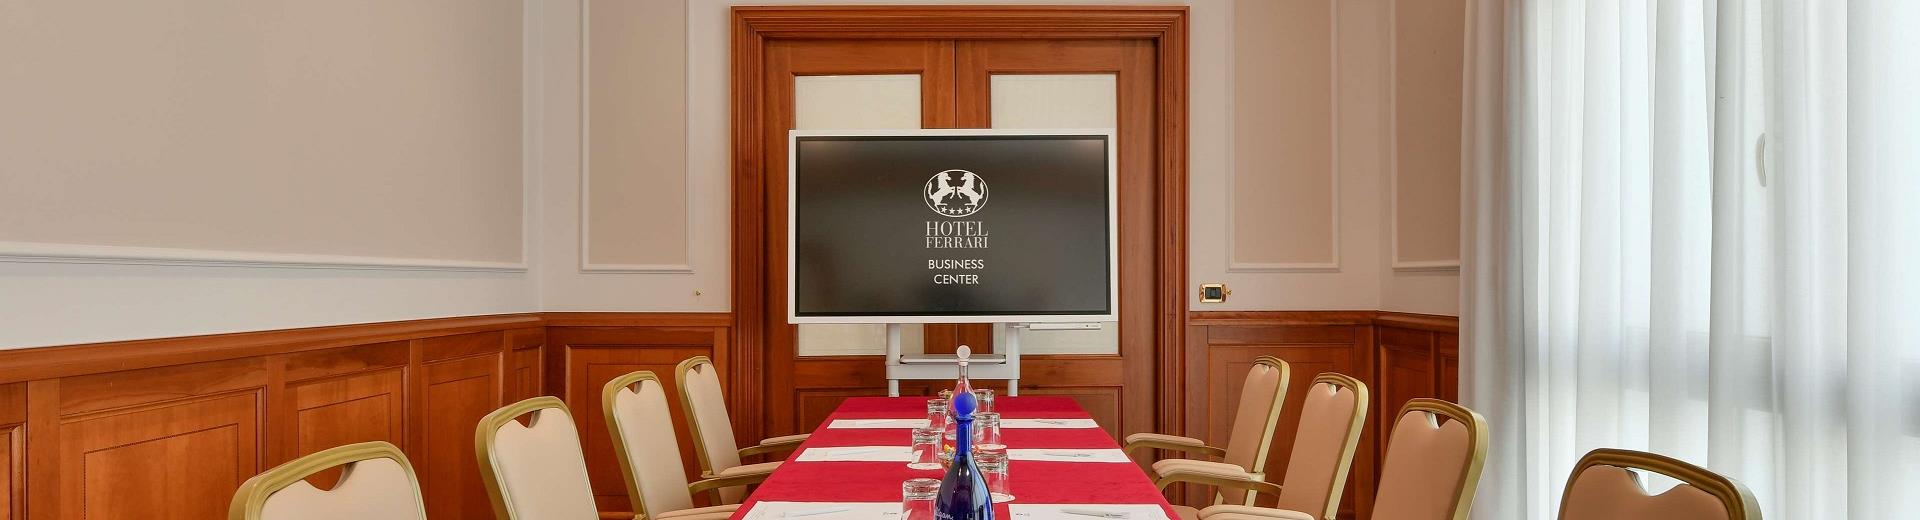 Organize your meetings and events in Naples with Hotel Ferrari: discover the details of our rooms, with capacity from 20 to 300 people!